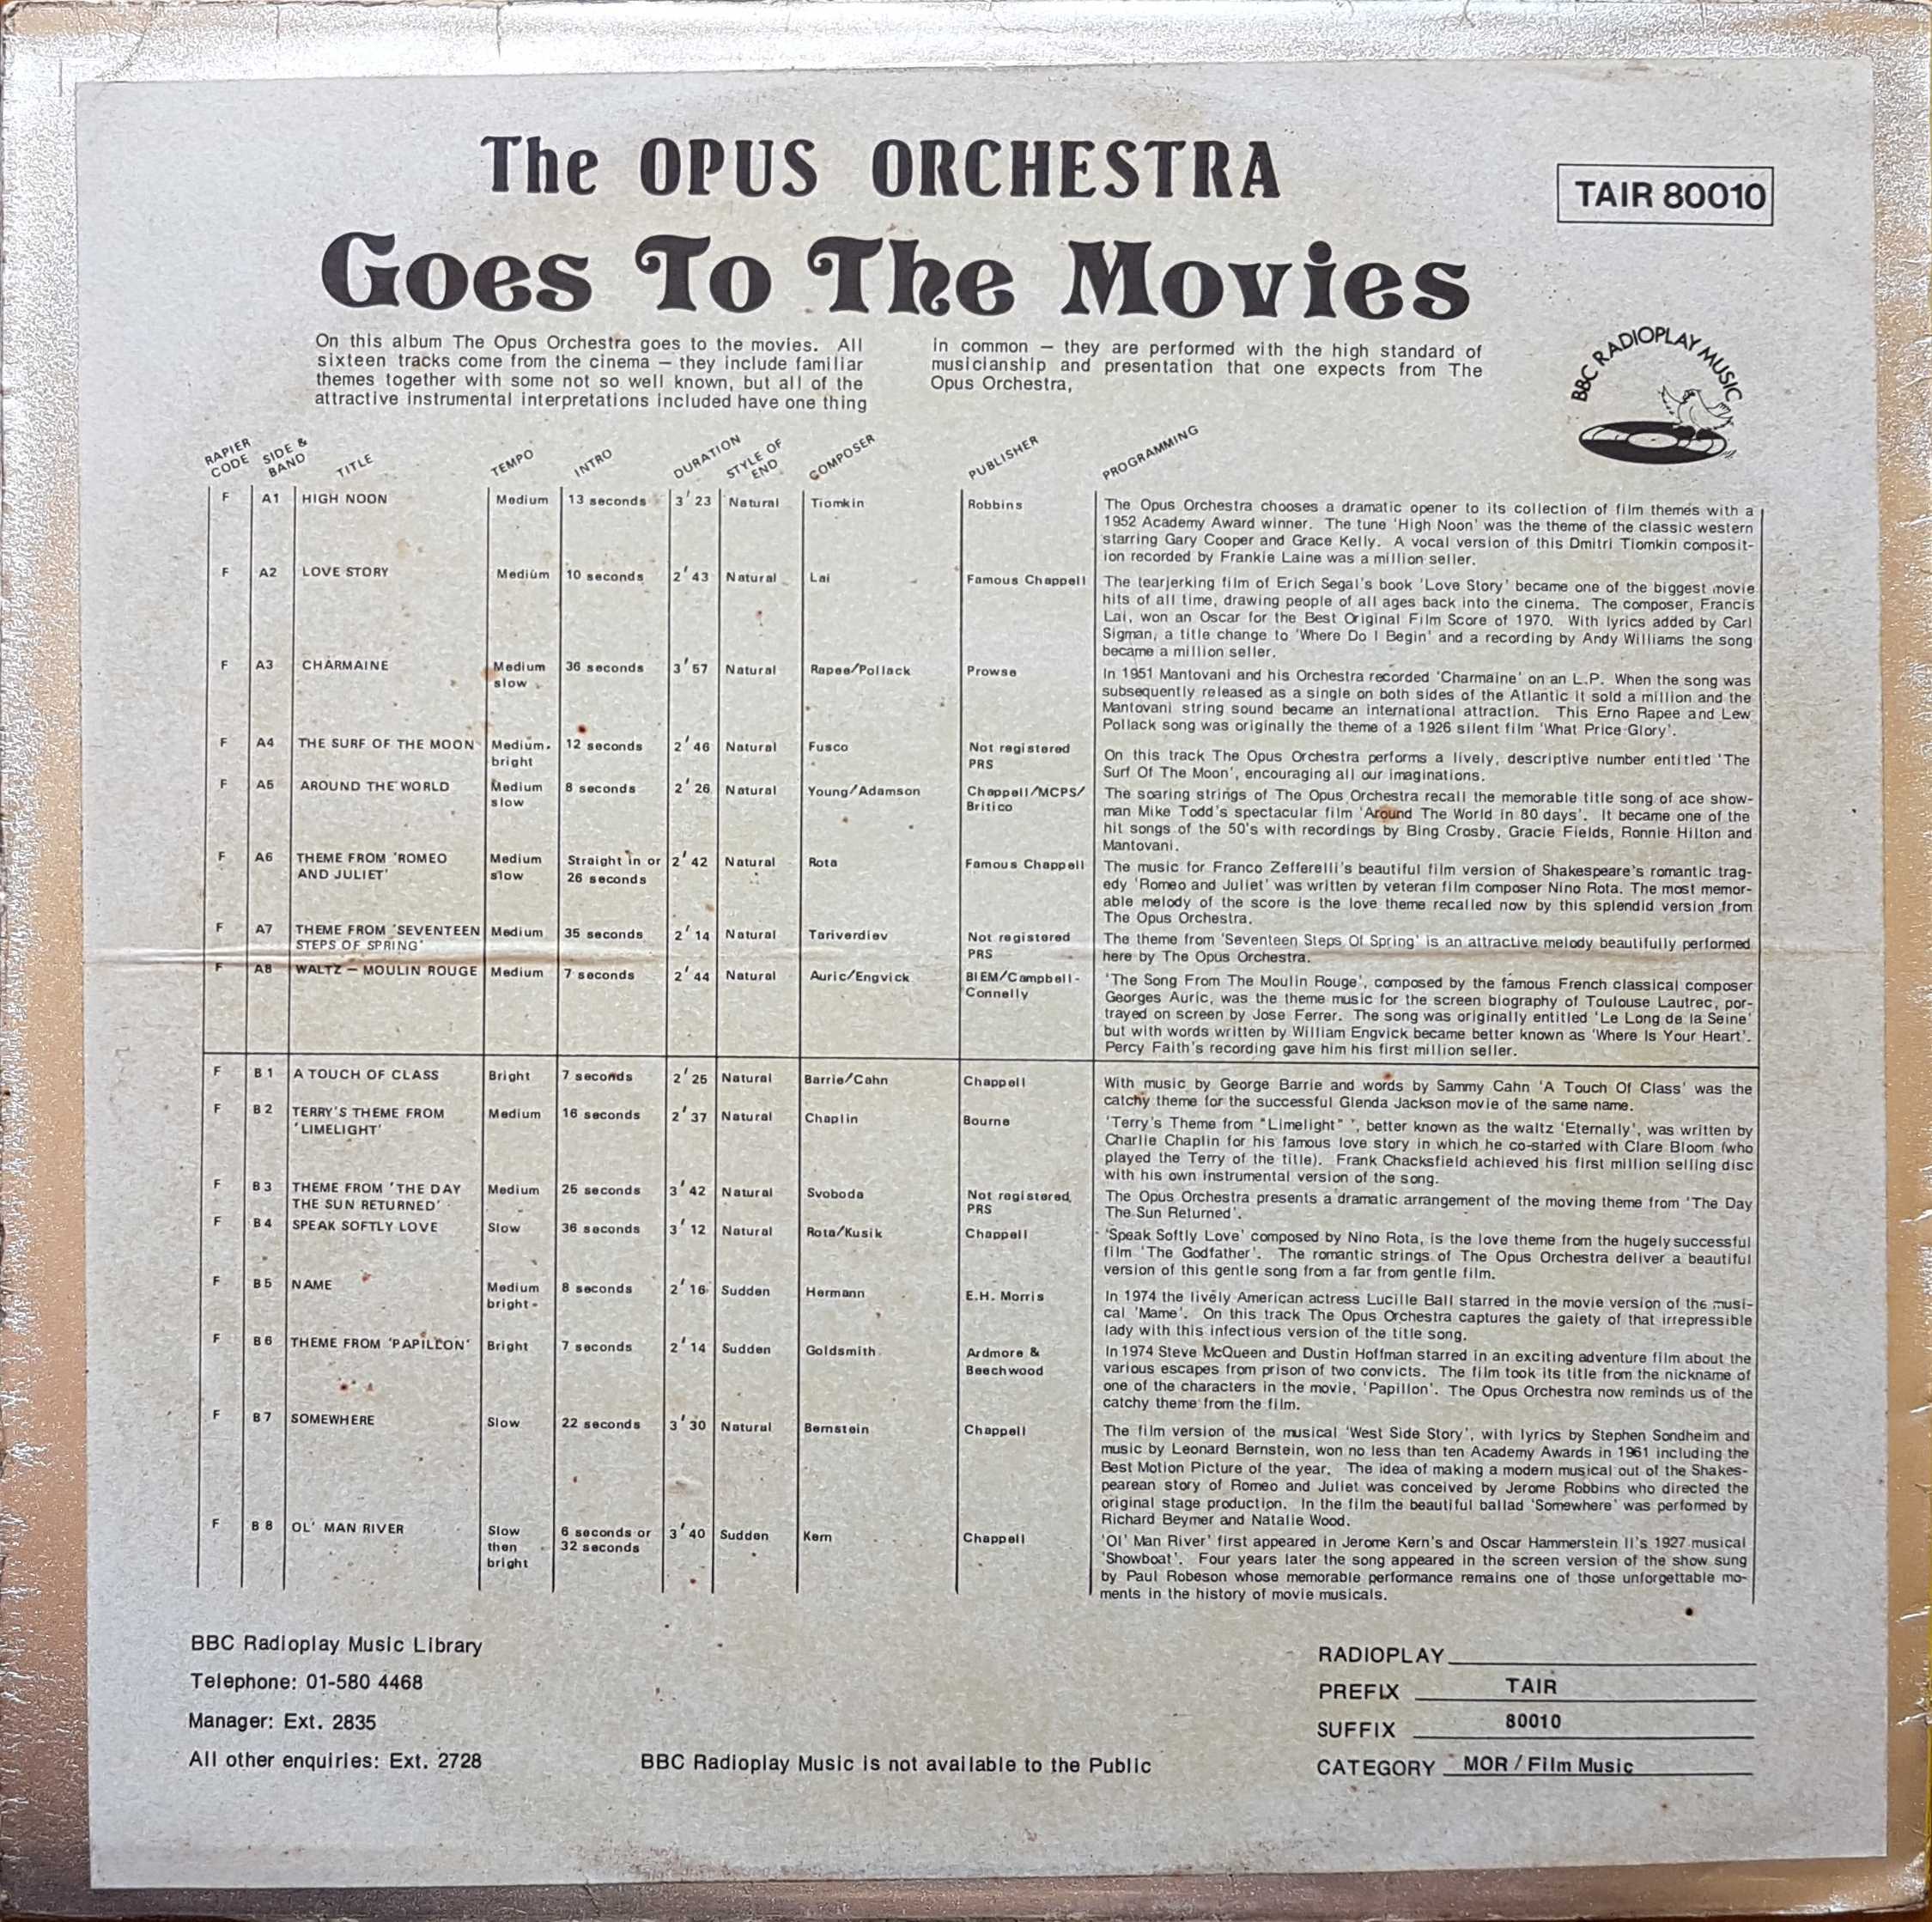 Picture of TAIR 80010 The Opus Orchestra goes to the movies by artist The Opus Orchestra  from the BBC records and Tapes library